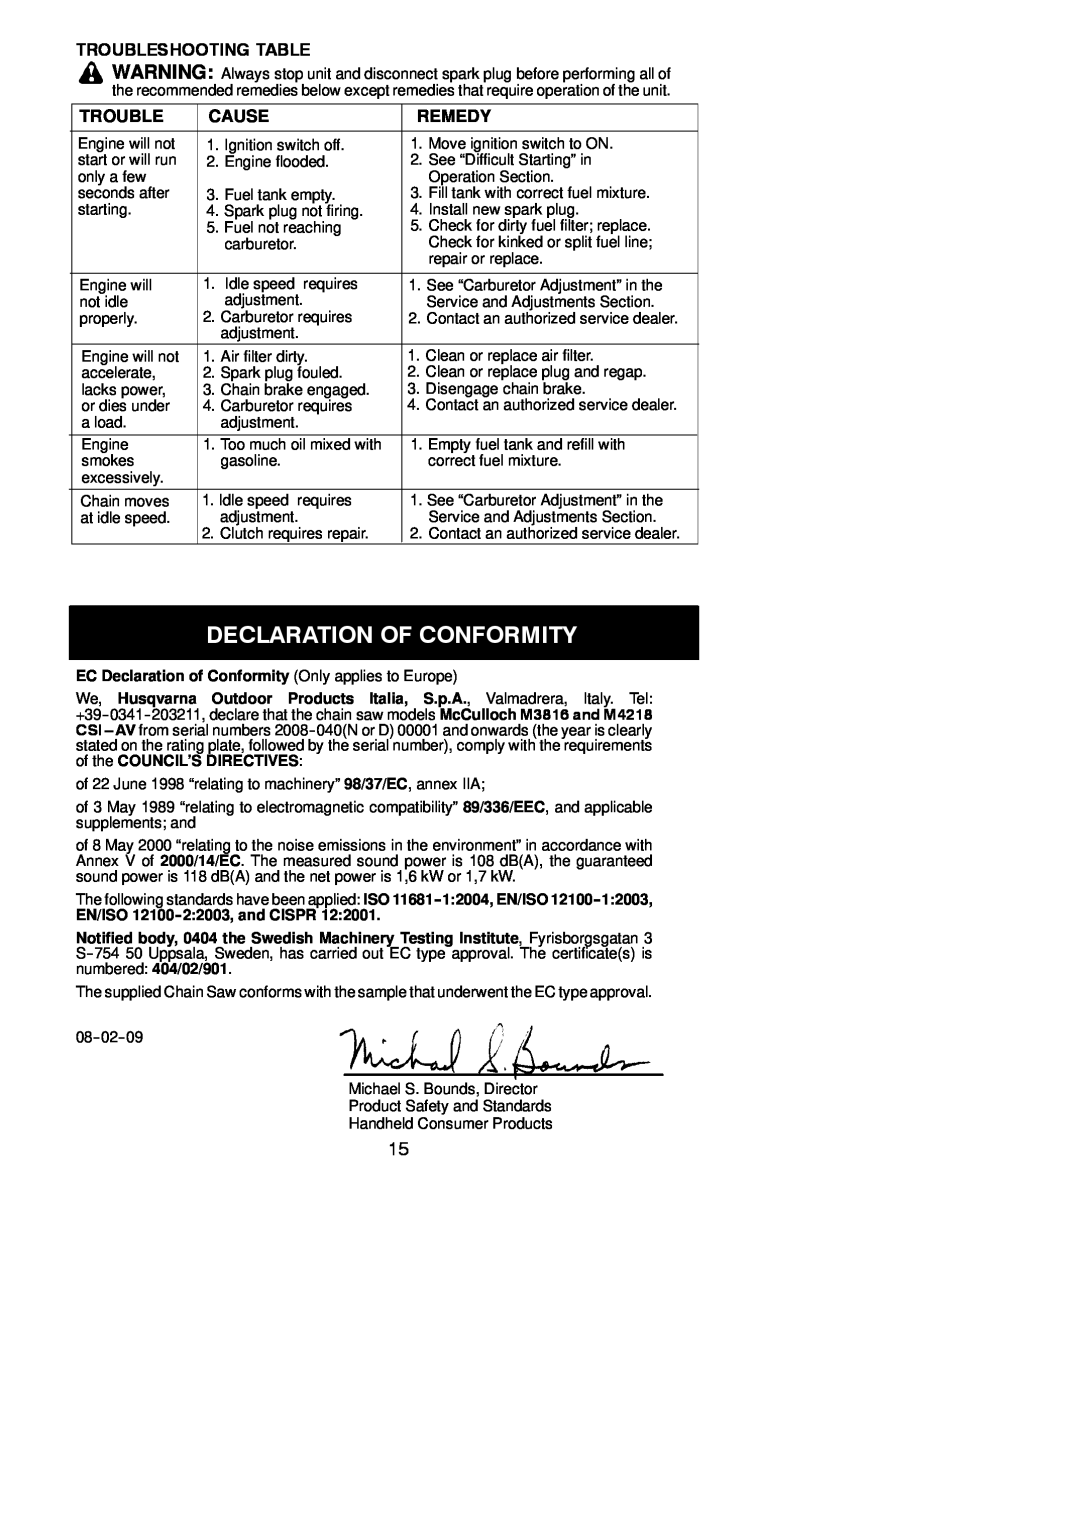 McCulloch M4218, M3816 instruction manual Declaration Of Conformity, Troubleshooting Table, Cause, Remedy 